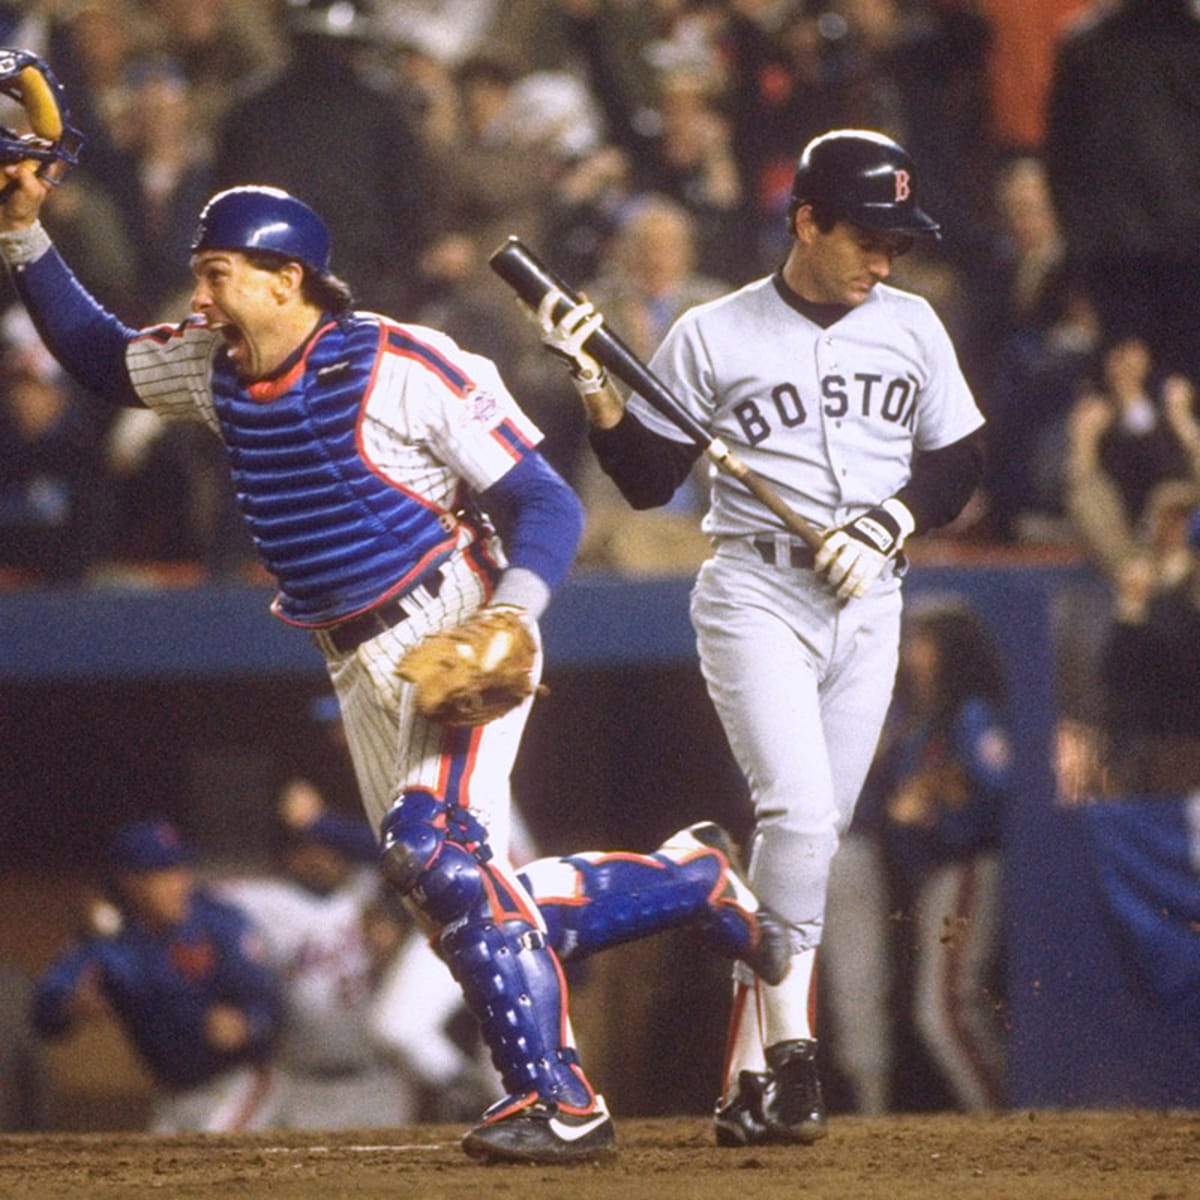 Boston Red Sox at New York Mets, 1986 World Series Game 6, October